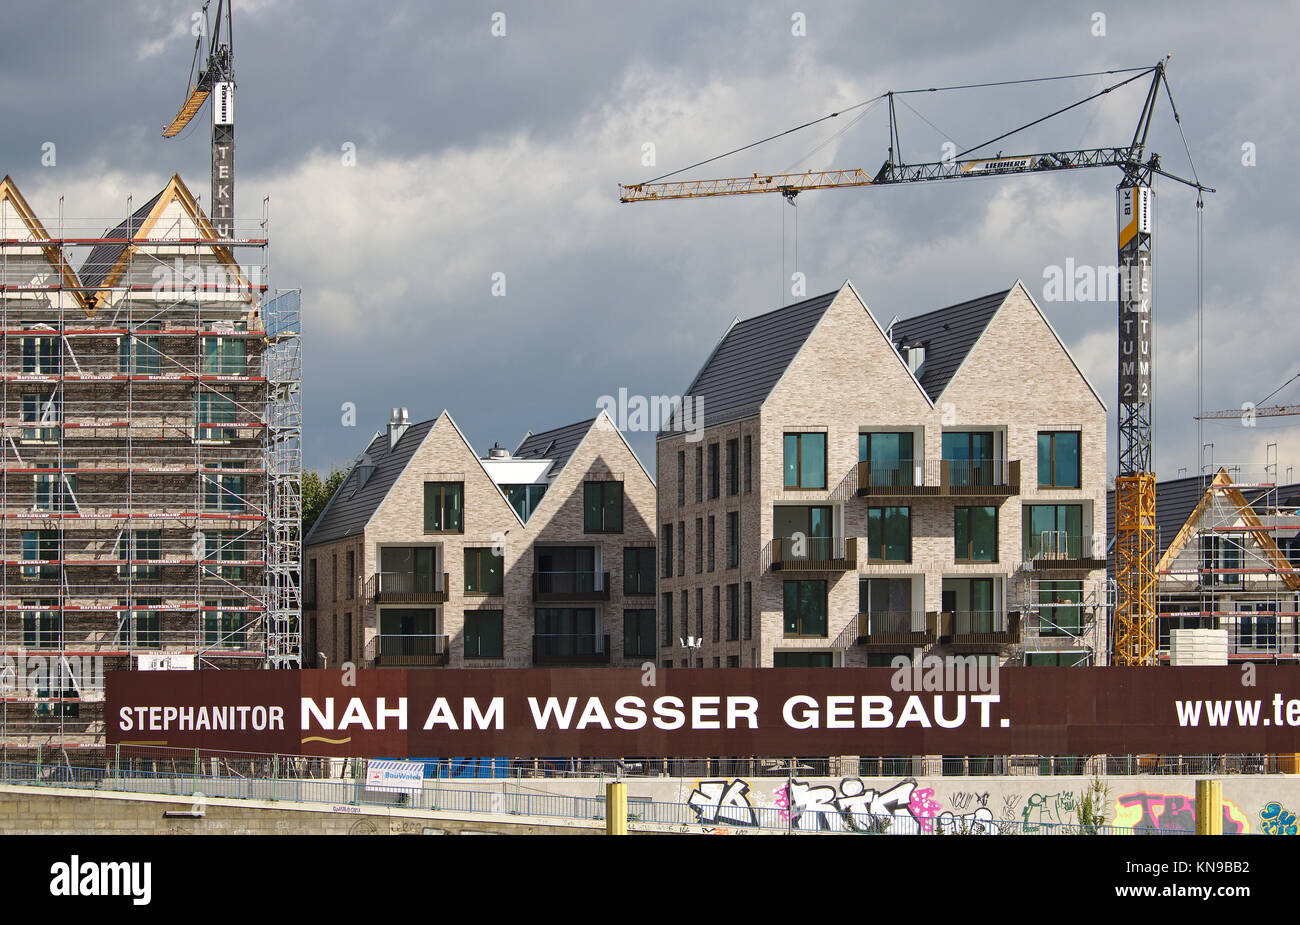 Bremen, Germany - September 14th, 2017 - Riverside construction site with cranes, scaffolding, partly and fully completed residential buildings and si Stock Photo